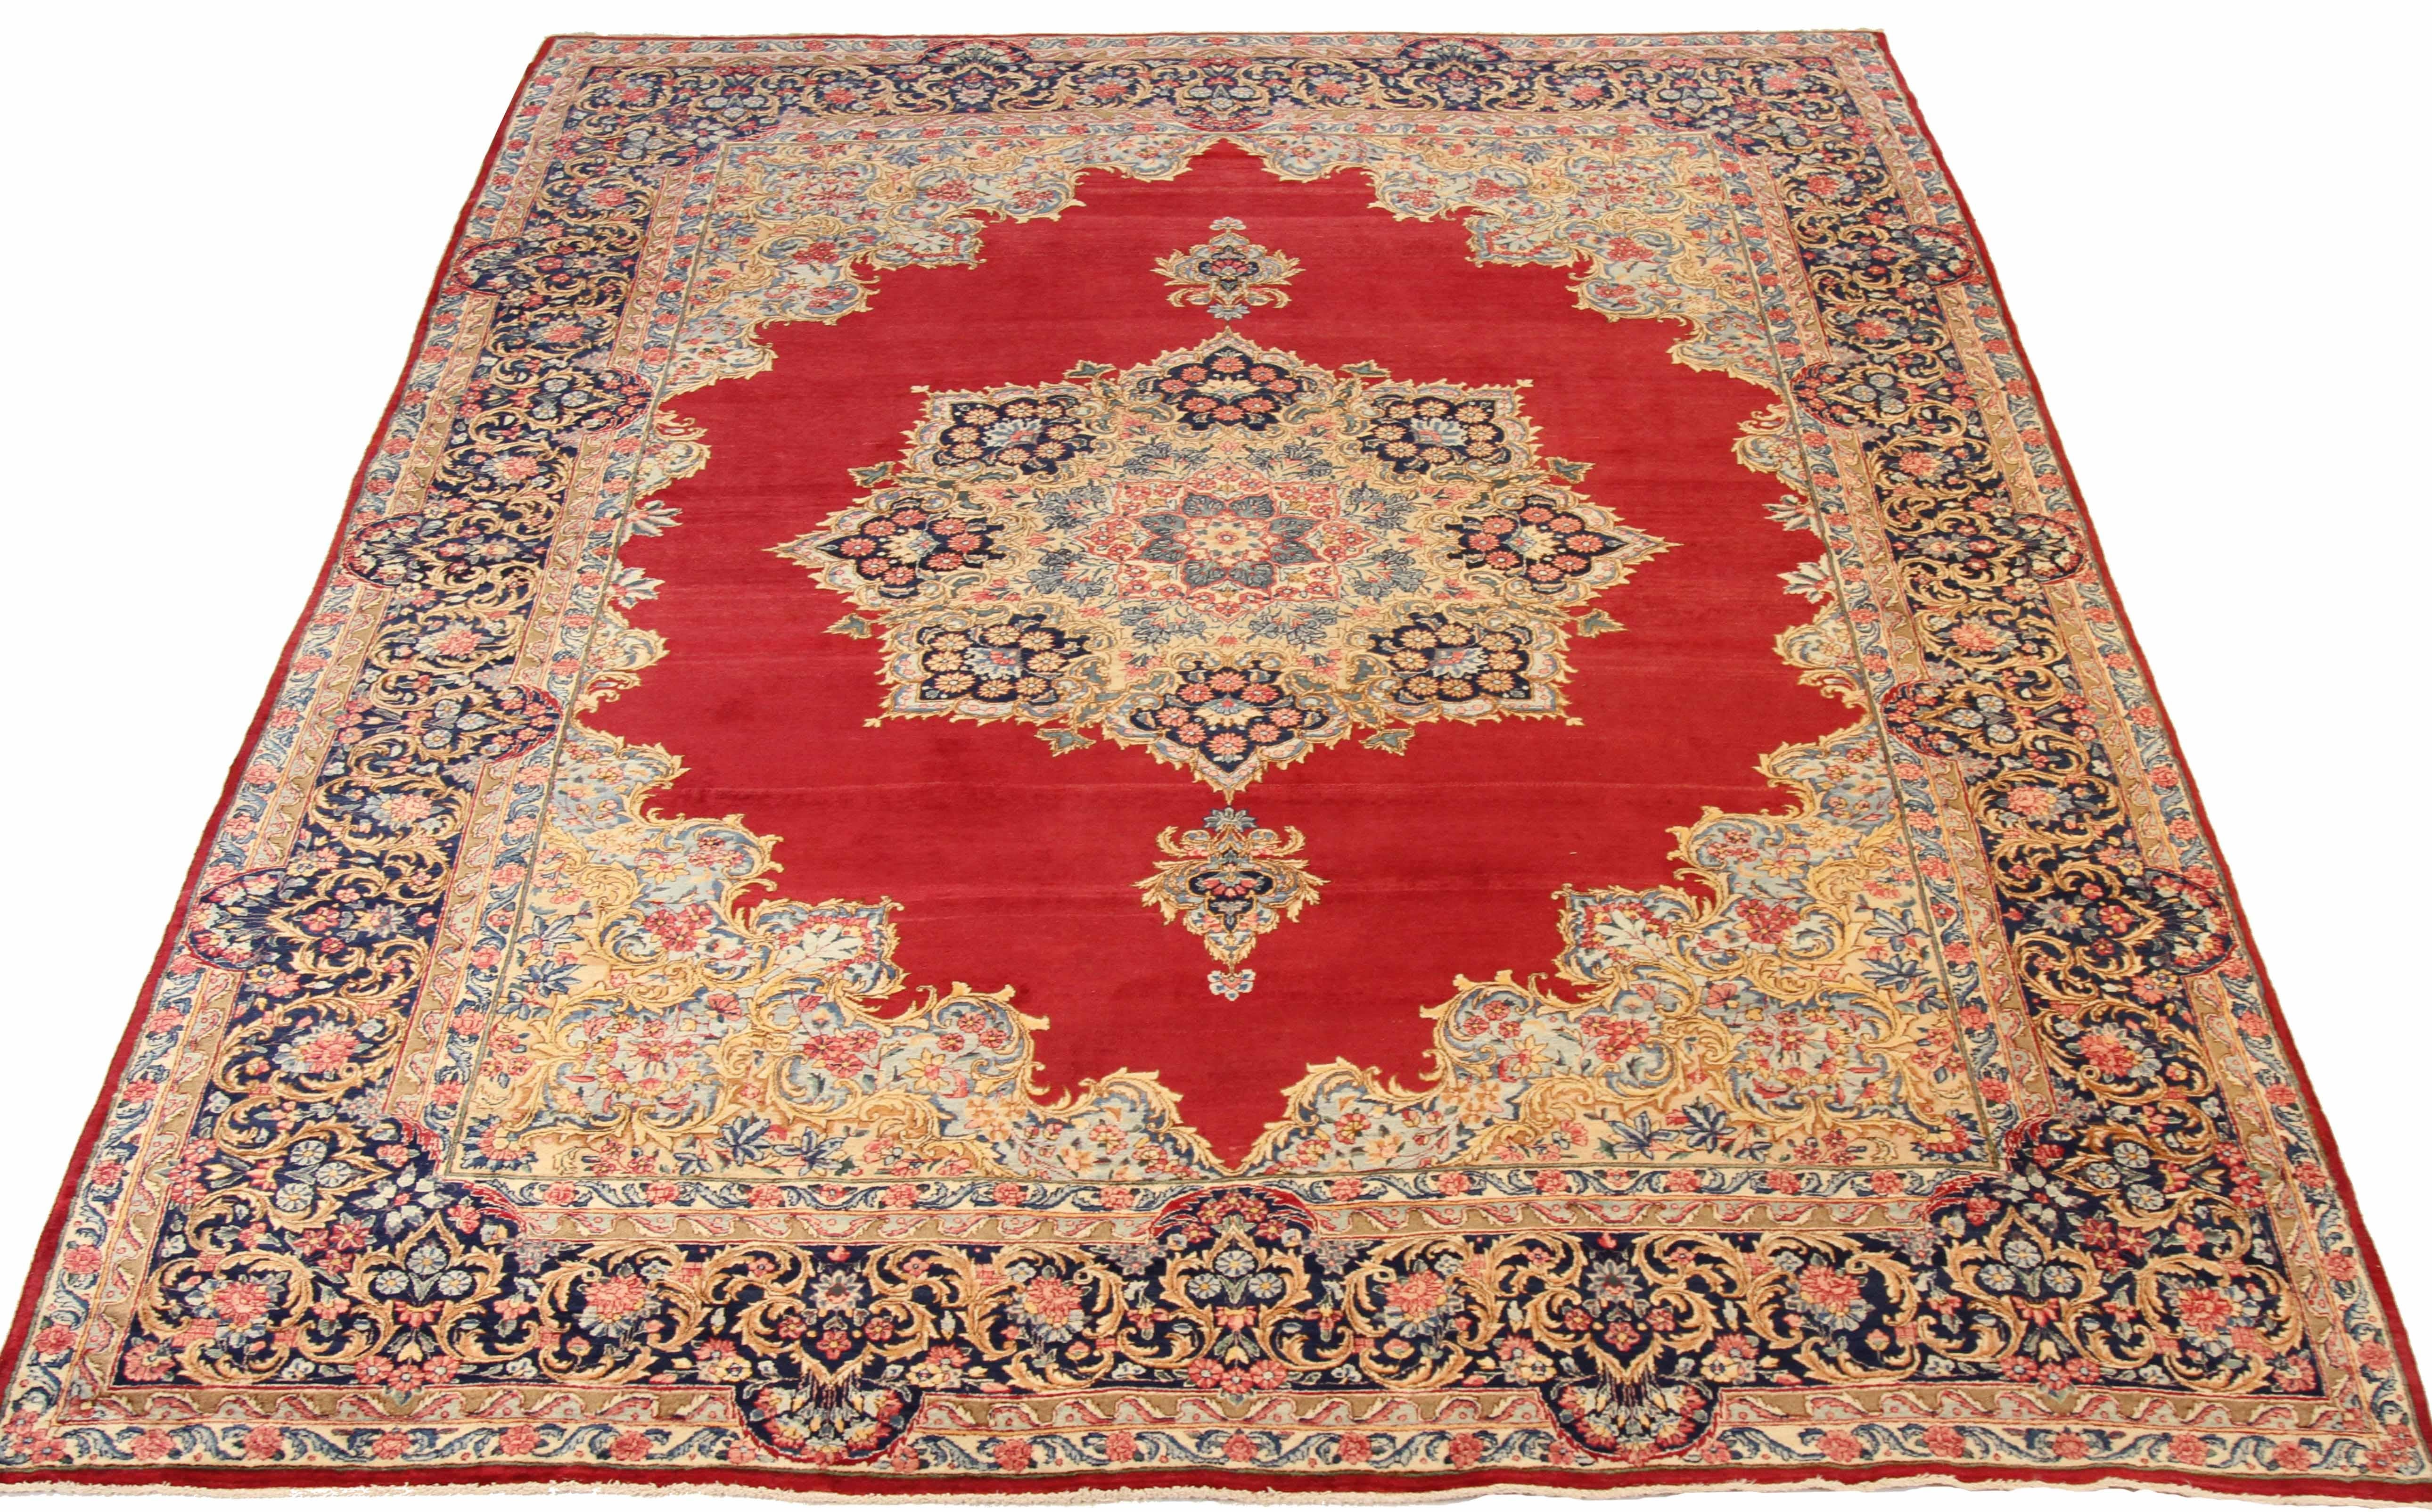 Antique Persian area rug handwoven from the finest sheep’s wool. It’s colored with all-natural vegetable dyes that are safe for humans and pets. It’s a traditional Kerman design handwoven by expert artisans. It’s a lovely area rug that can be